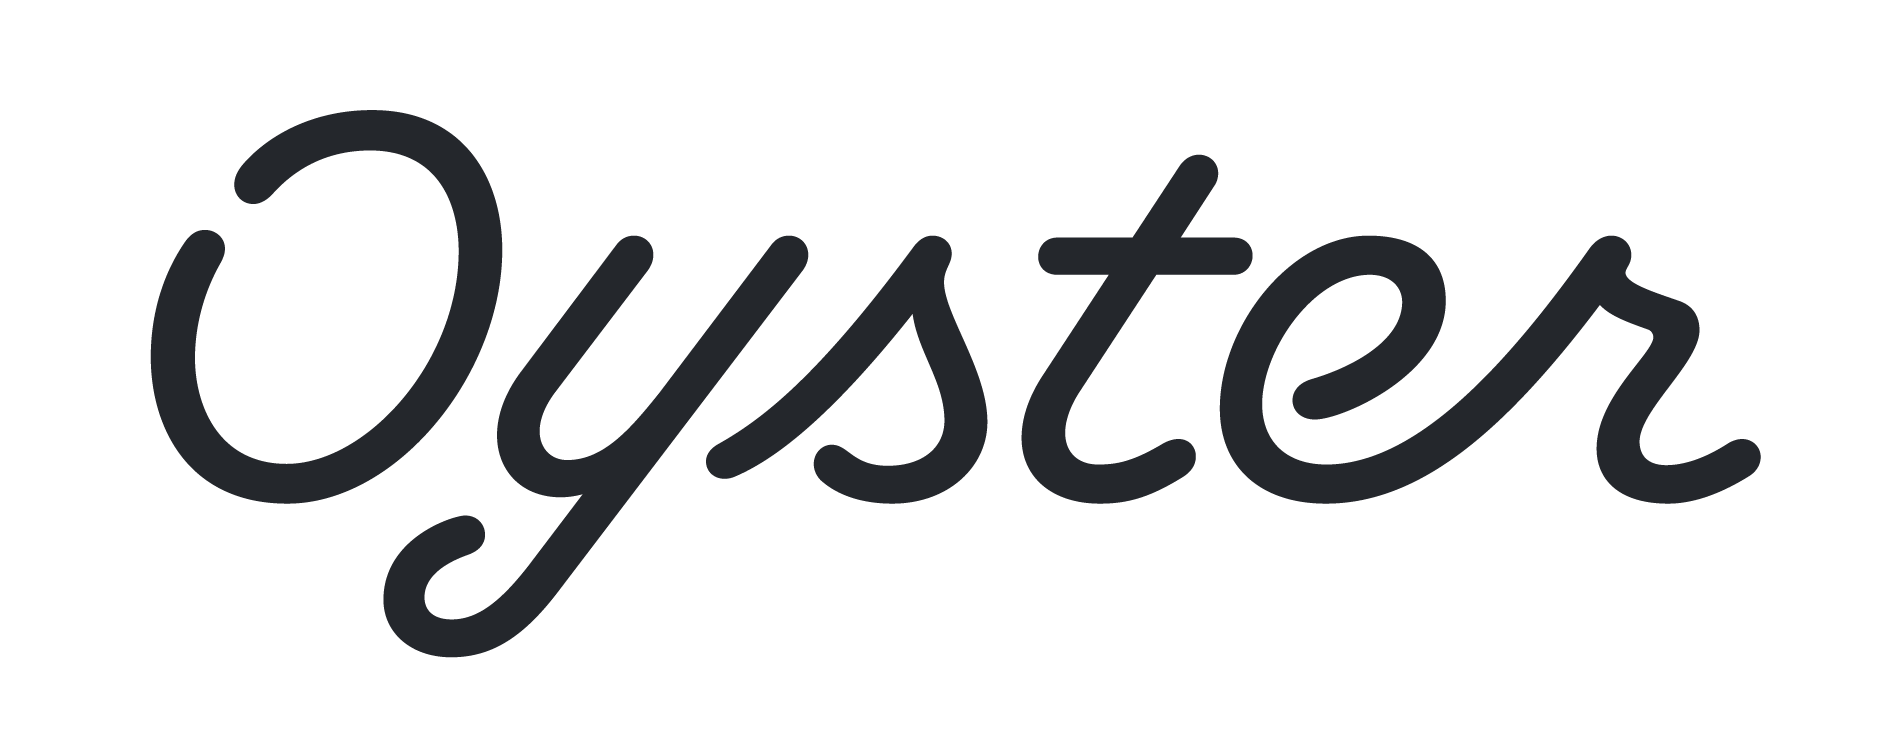 oyster coolers logo